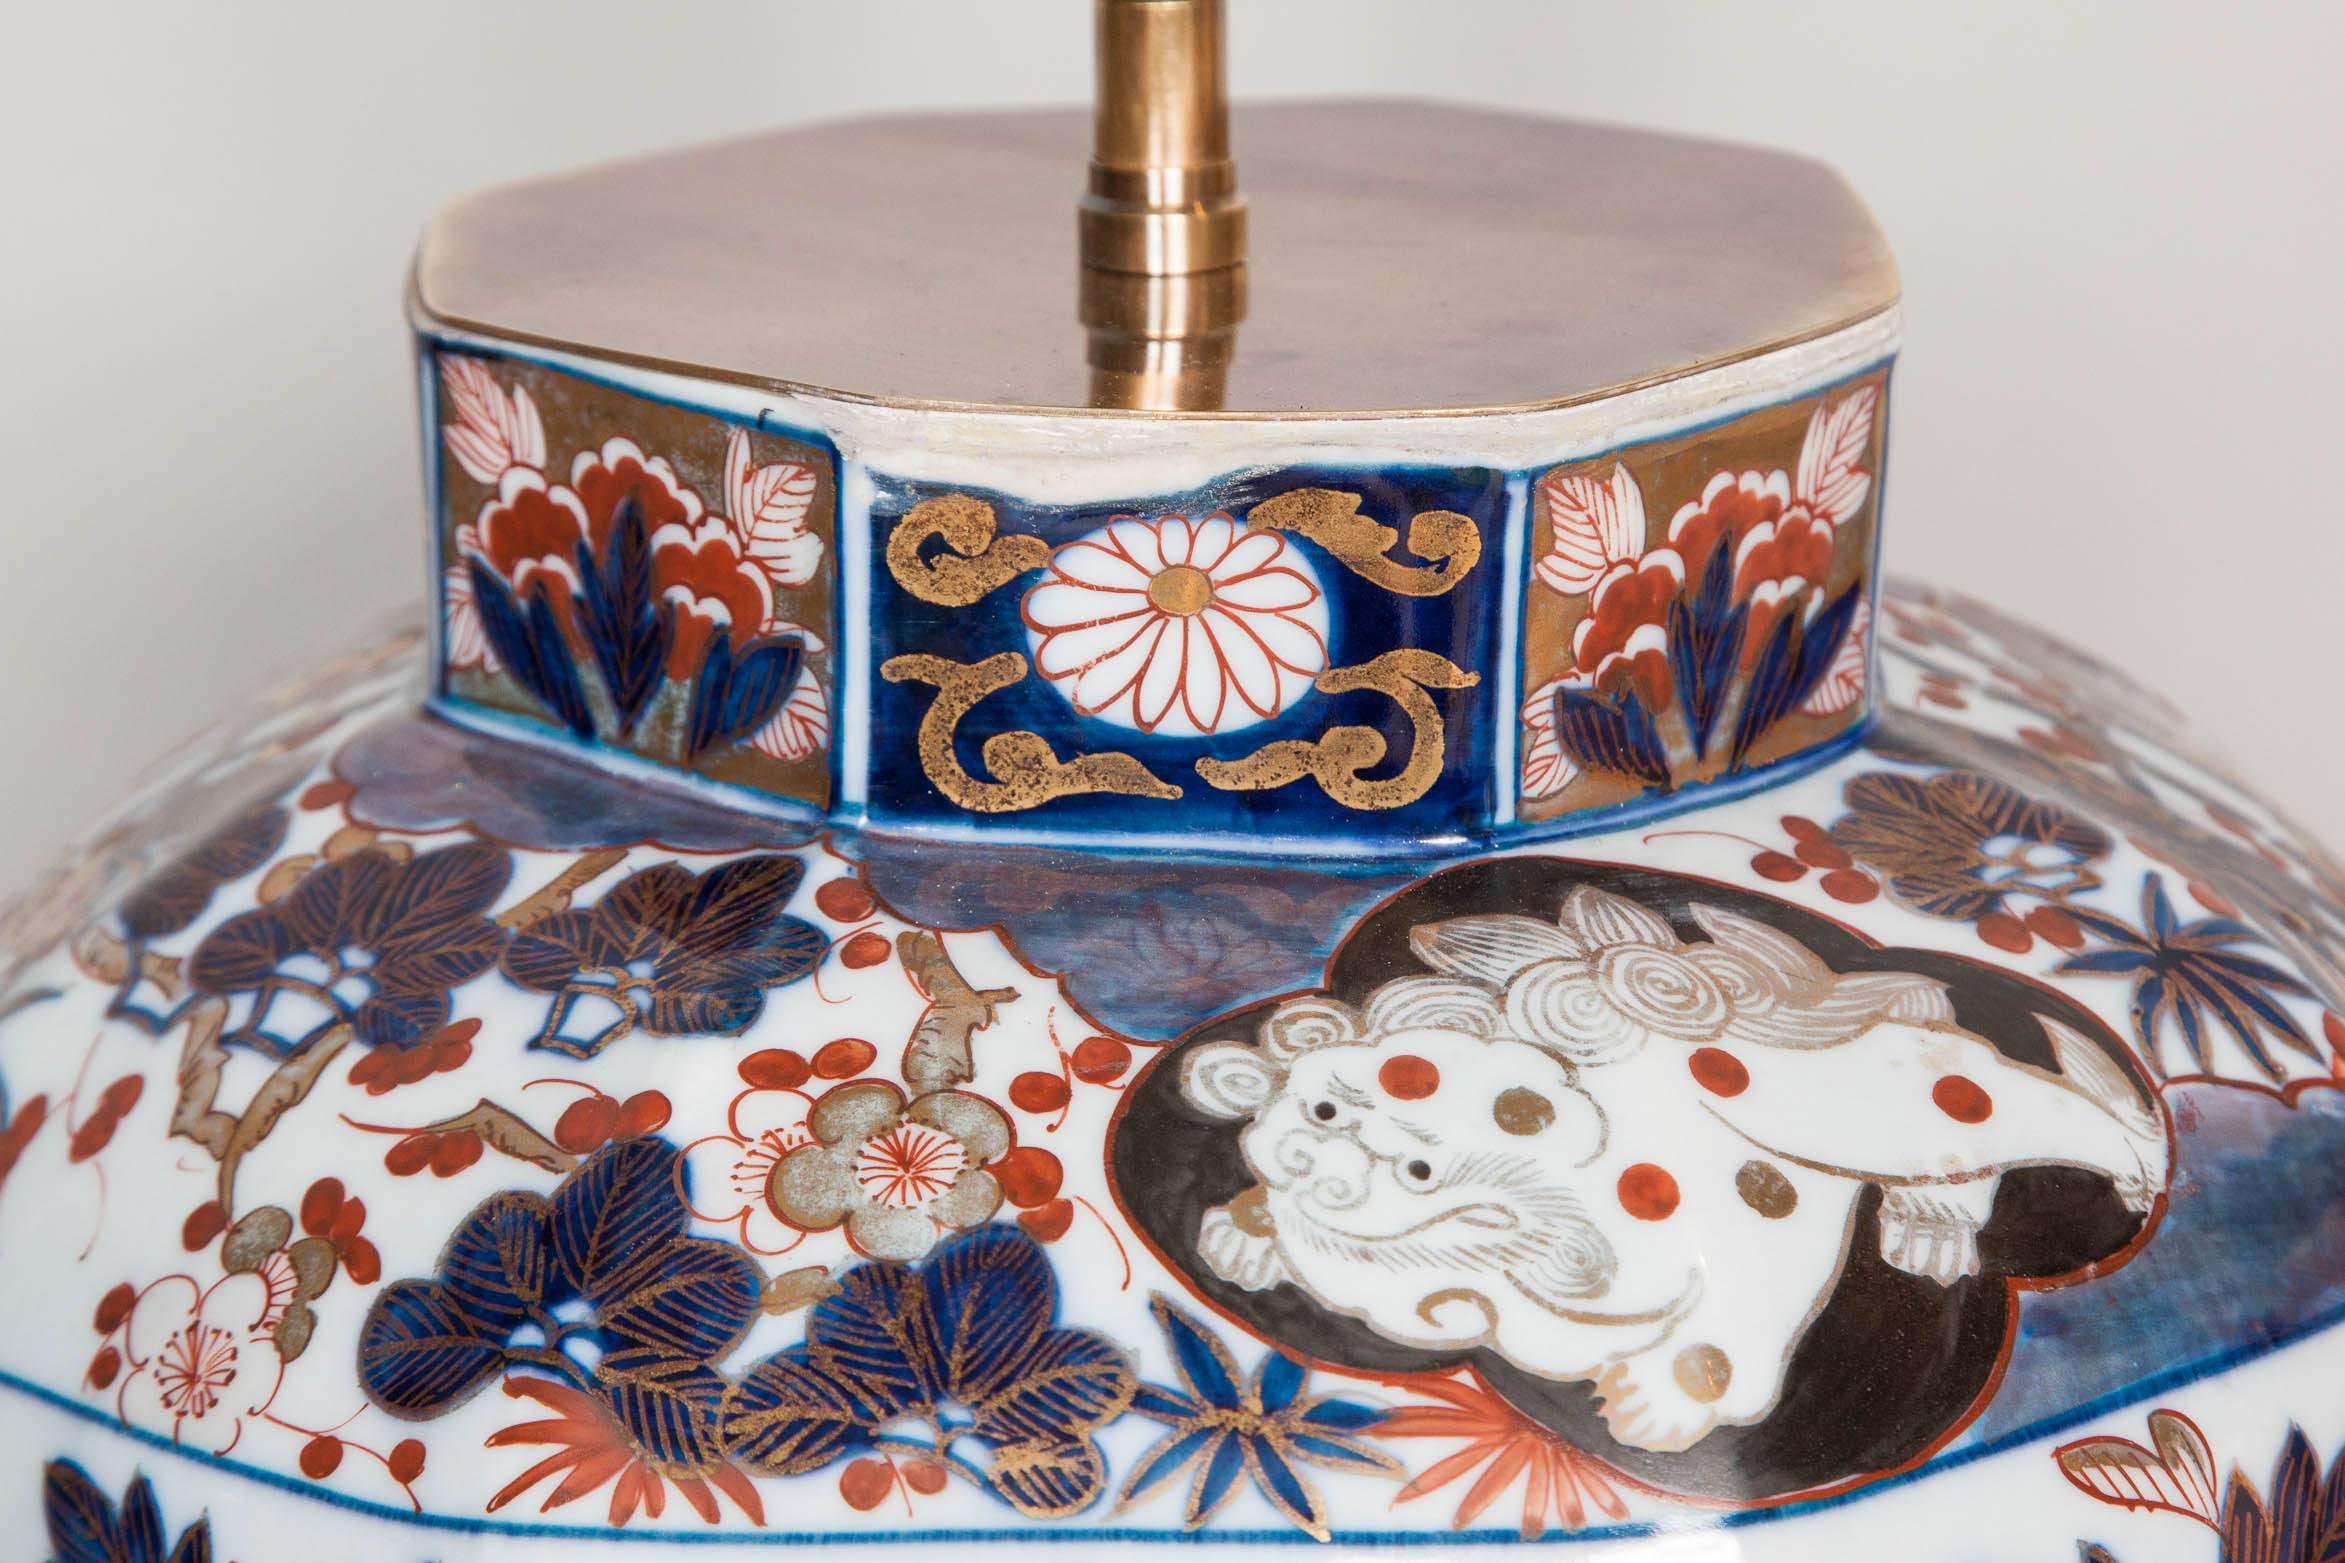 A really fine pair of medium sized early 18th century Japanese richly decorated Imari baluster vases of octagonal shape. Both vases have been lamped on hand-carved and water gilt wooden bases and fitted with antiqued brass plates with light